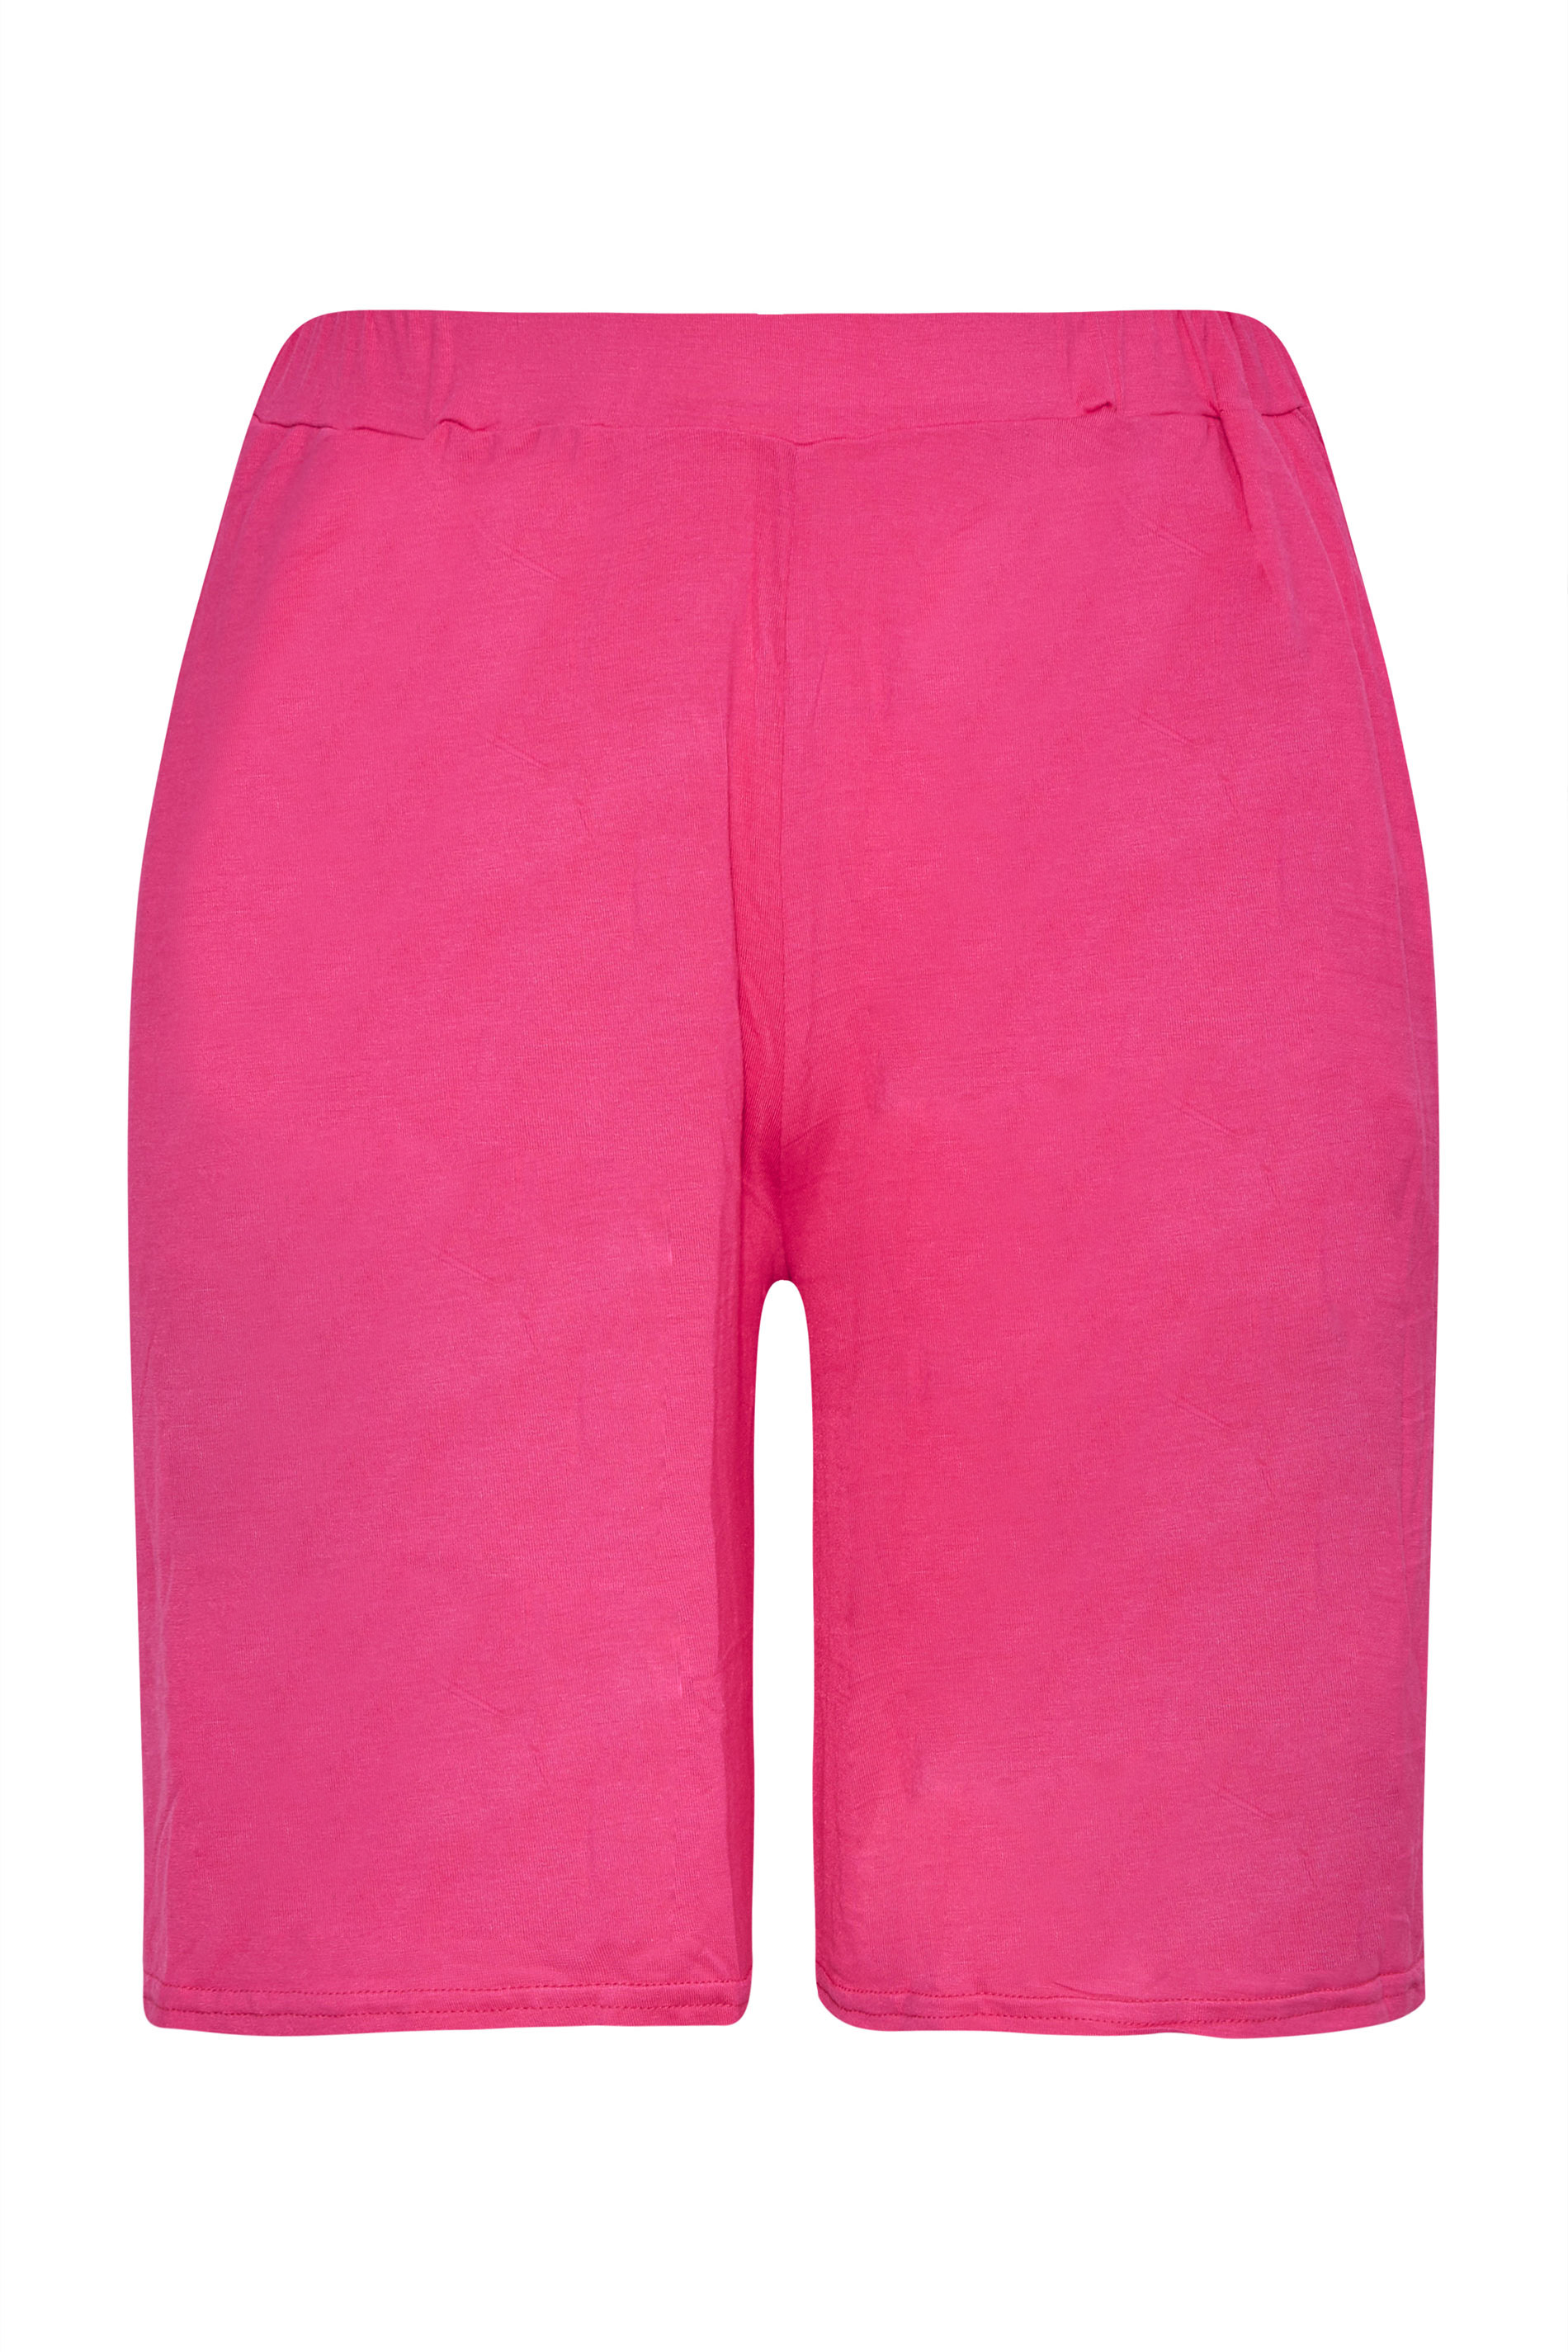 Plus Size Bright Pink Pull On Stretch Jersey Shorts | Yours Clothing